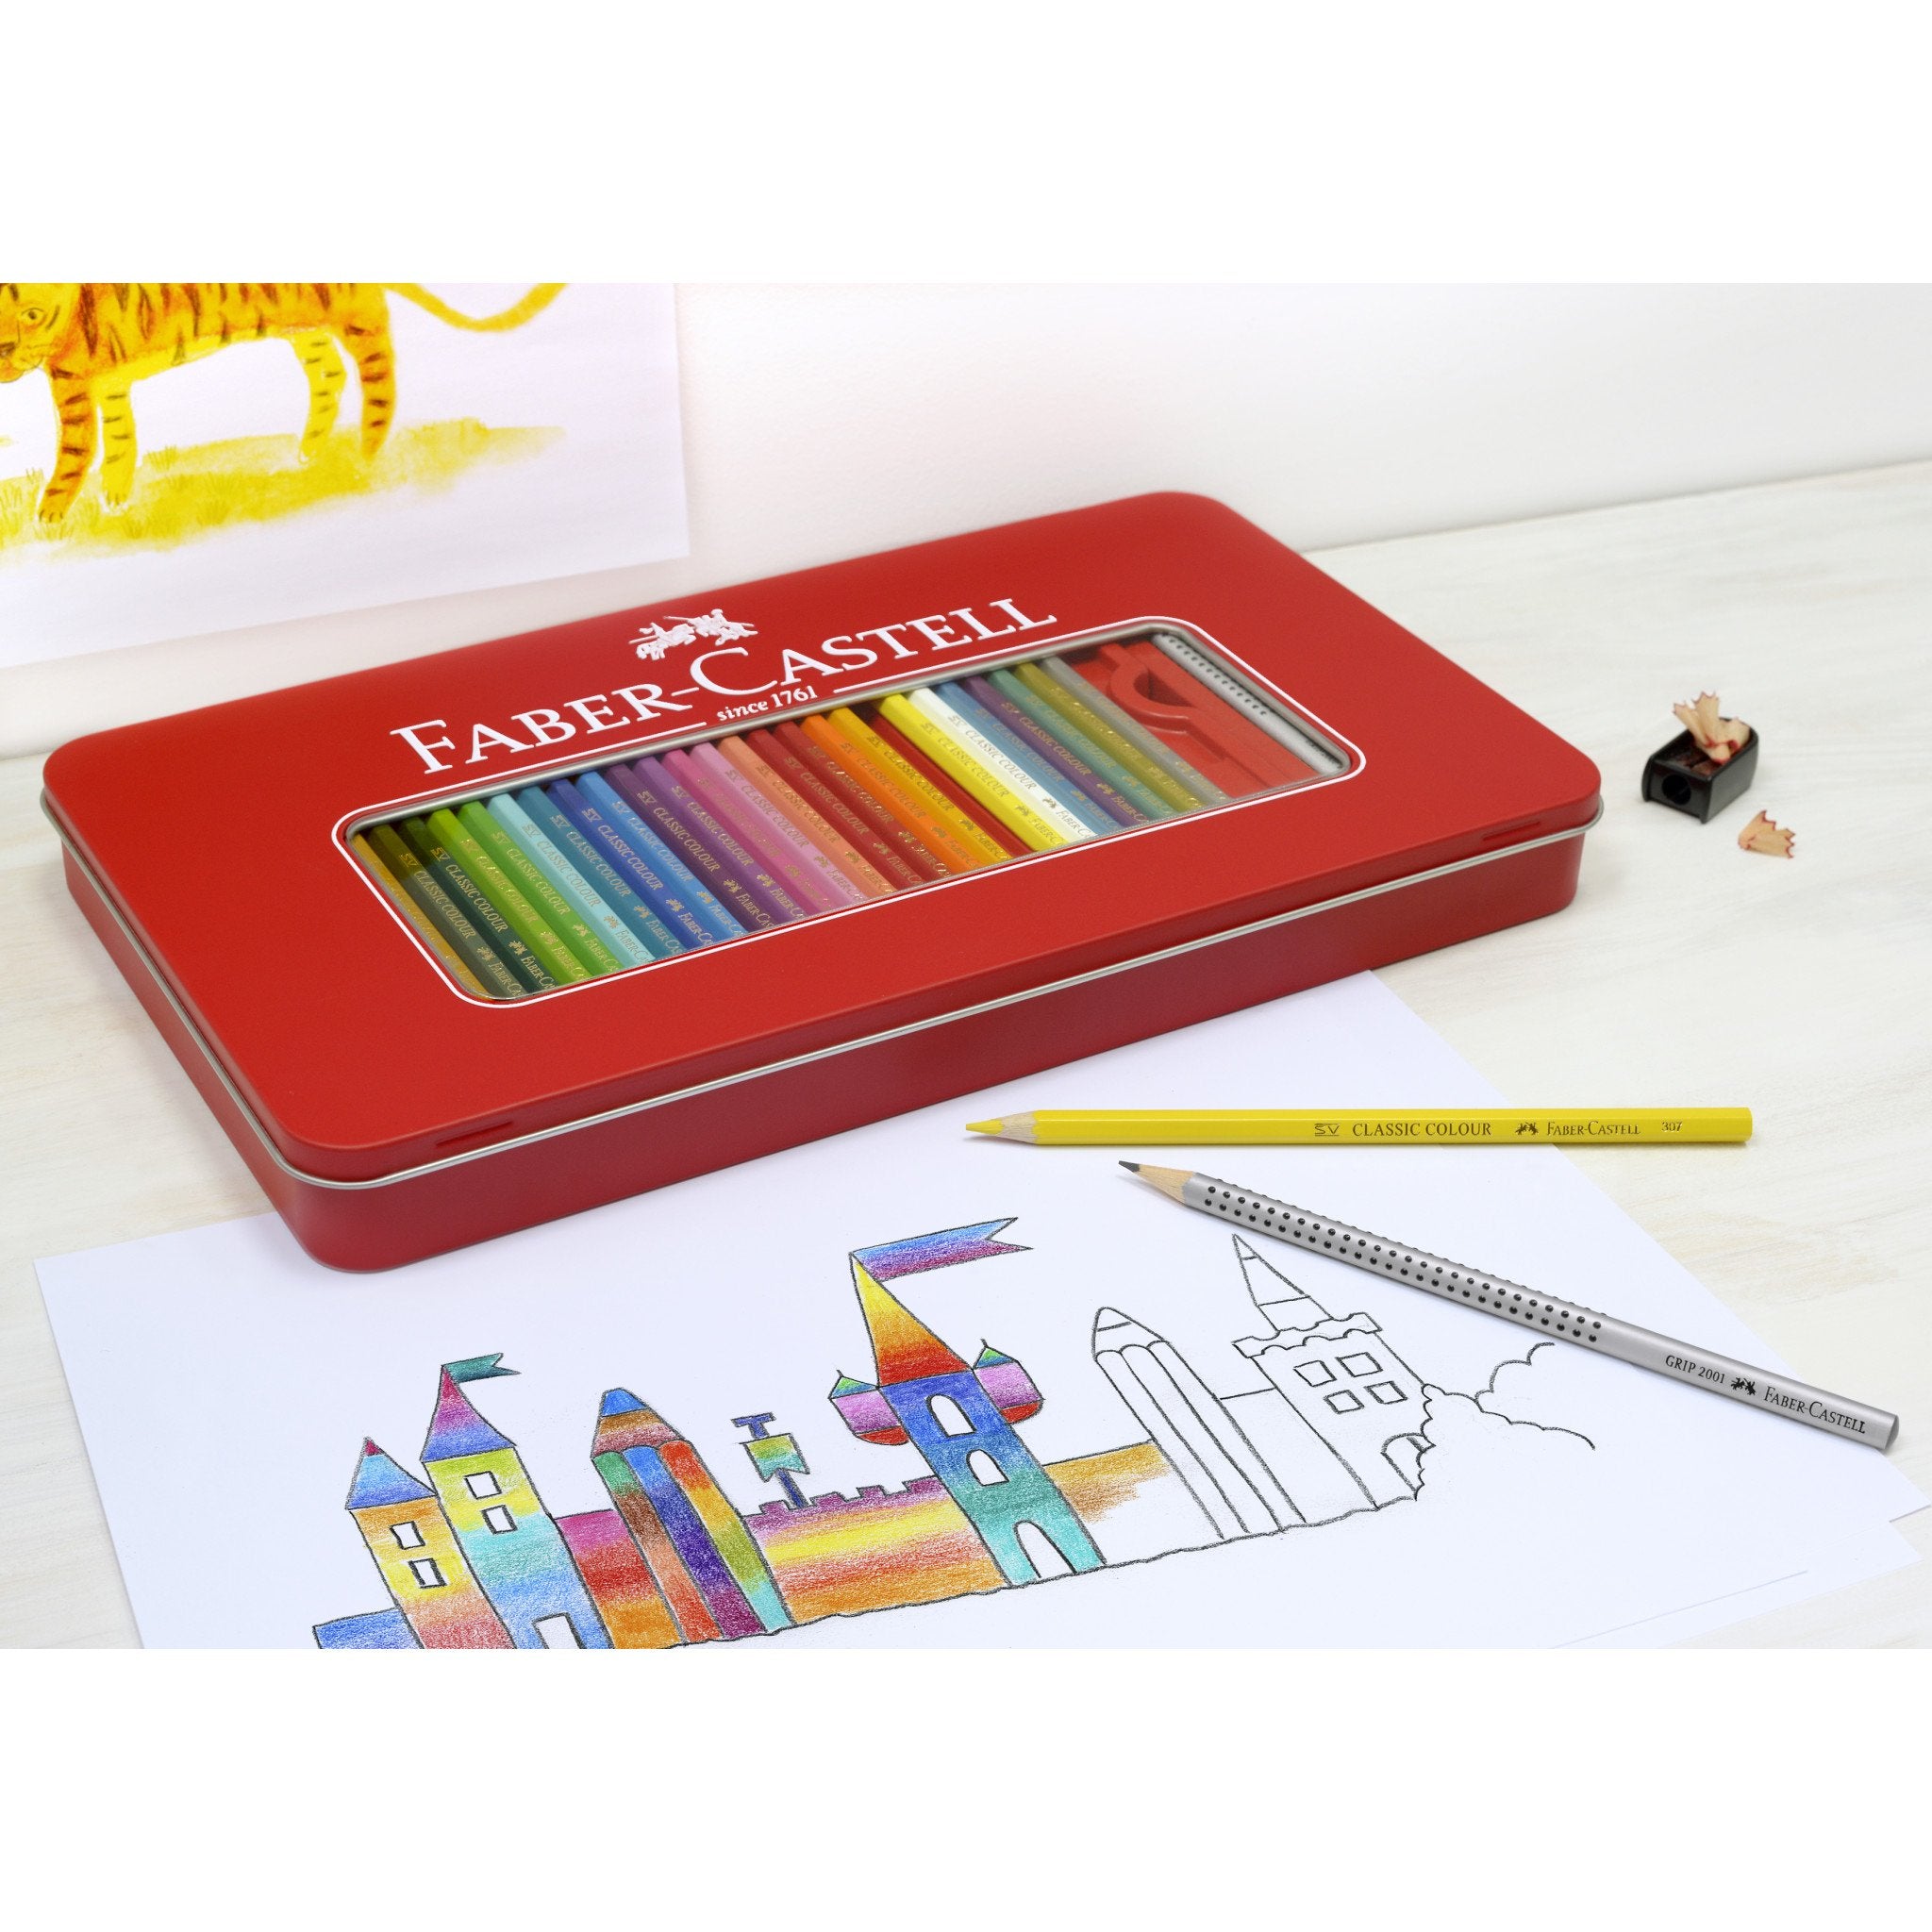 Hexagonal Coloring Box Art Kit Set Of 46 Pieces With Color Pencils,  Crayons, Water Color, Marker Pens for kids